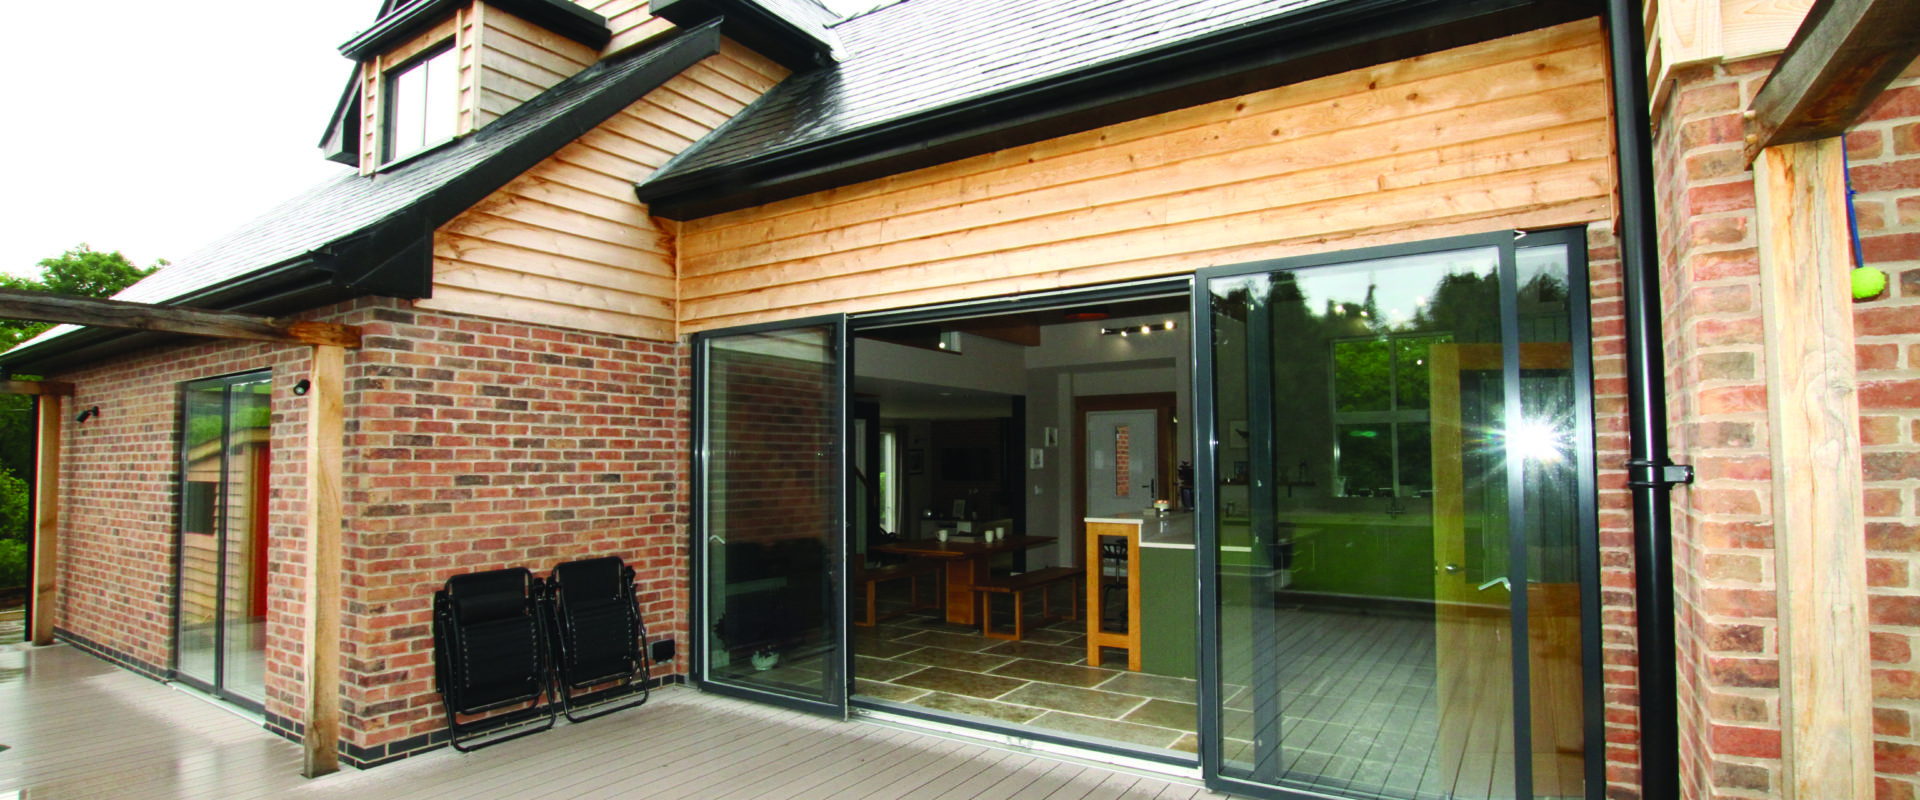 Self Build Homes - Timber framed homes buildings and housing